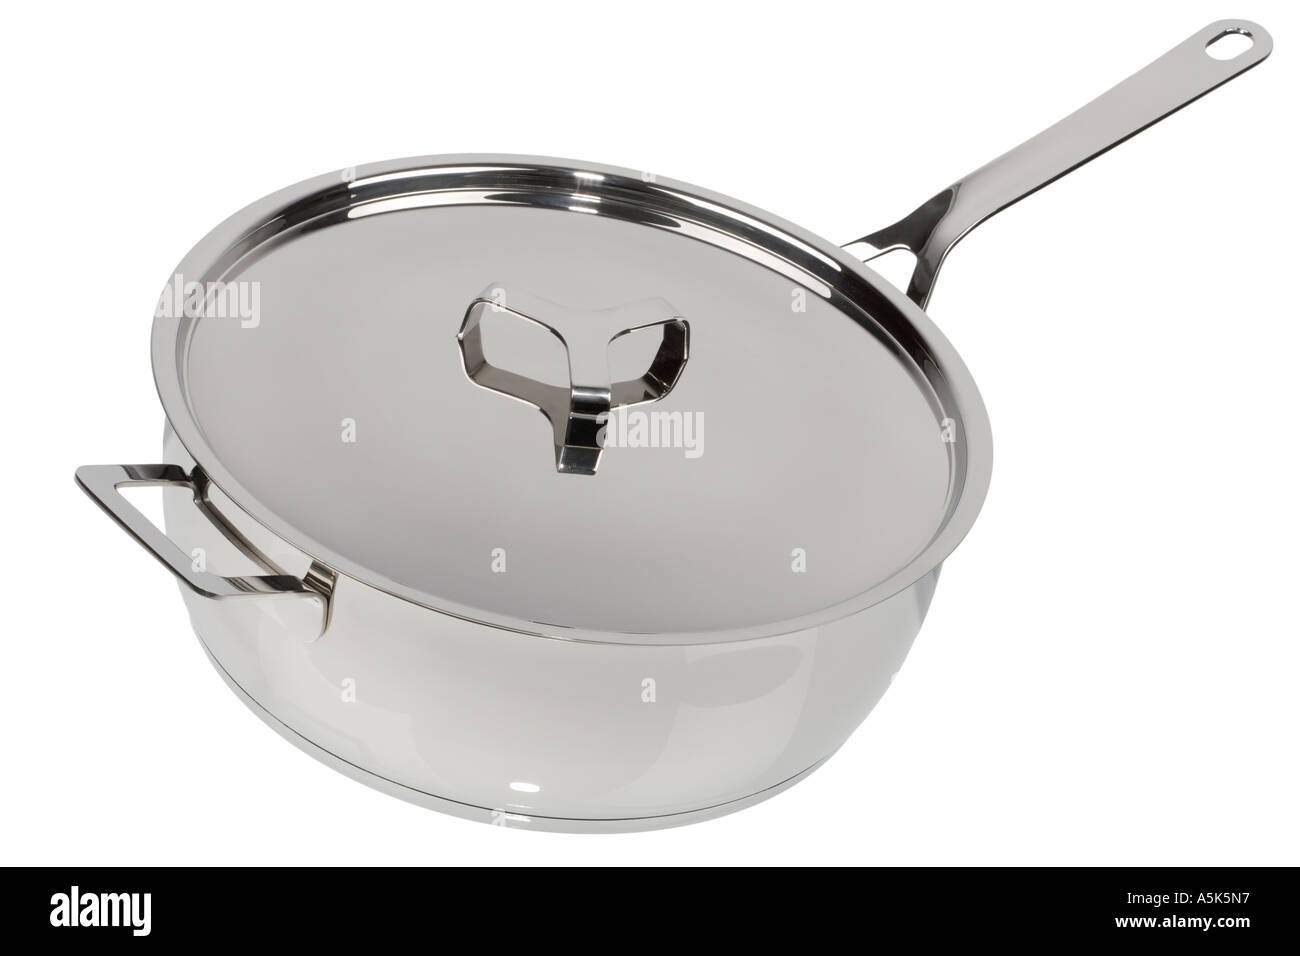 Stainless steel saucepan with lid Stock Photo